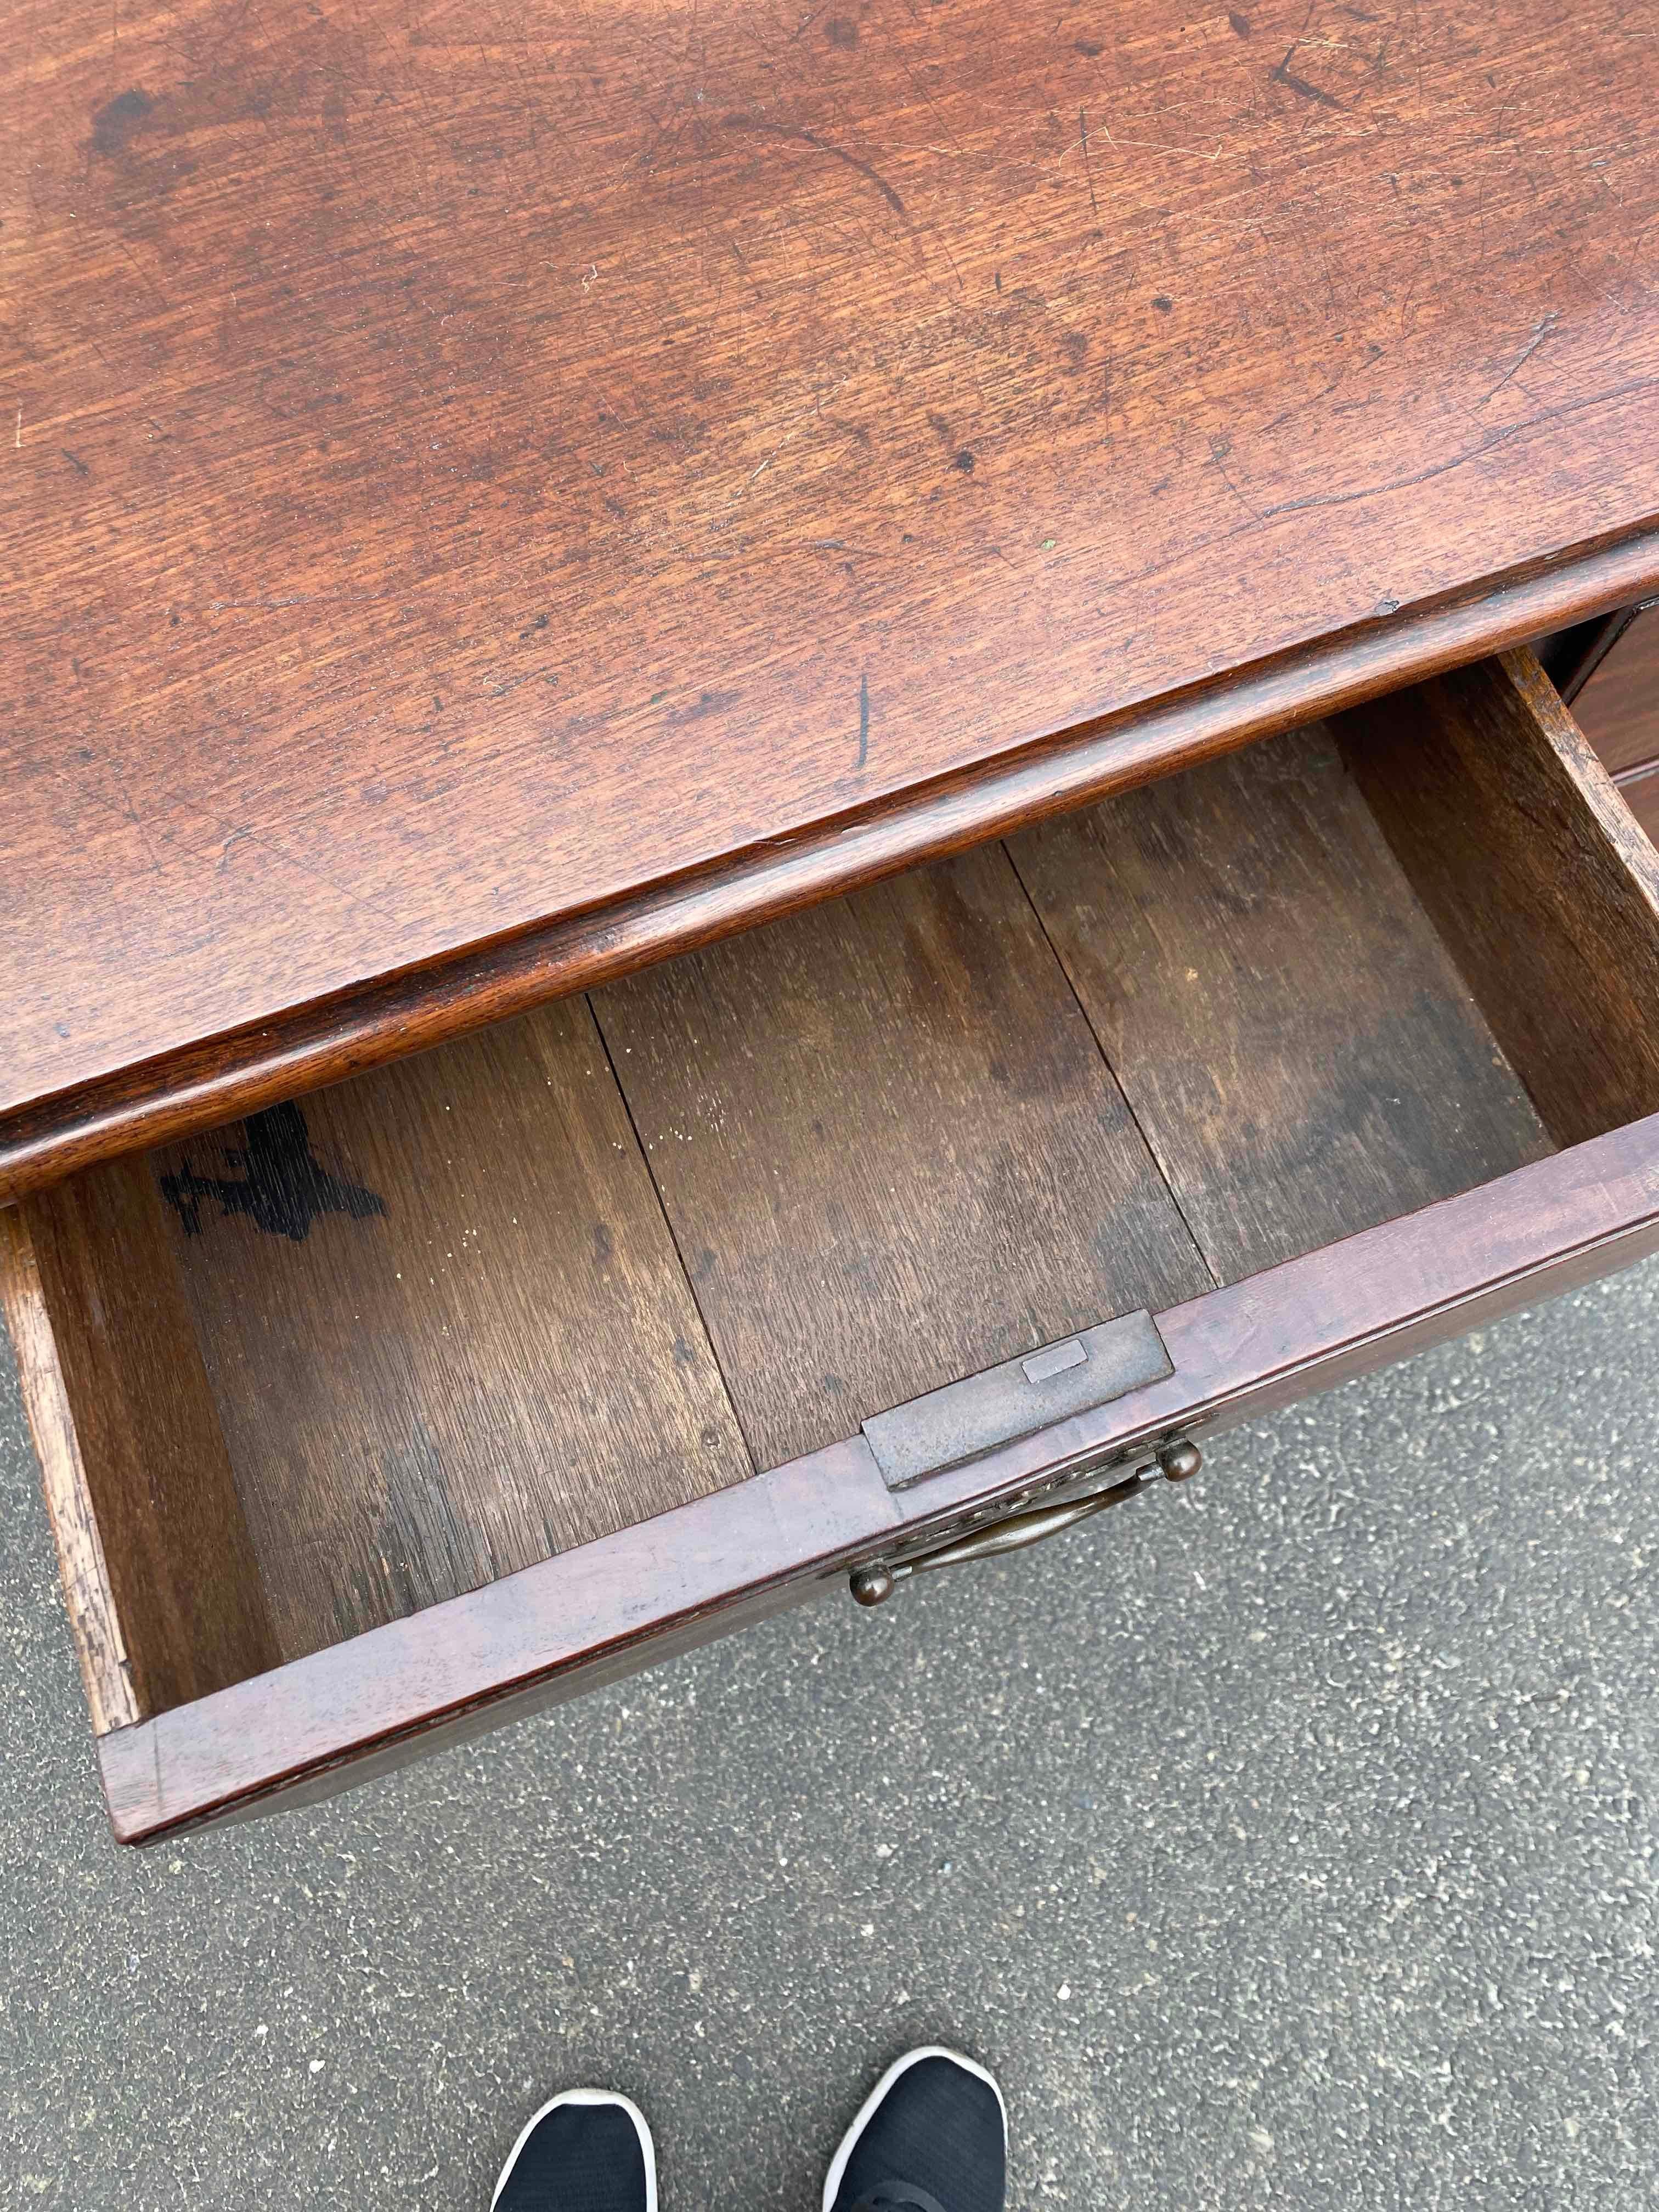 19th Century Mahogany Dresser with Bun Feet In Good Condition For Sale In Nantucket, MA